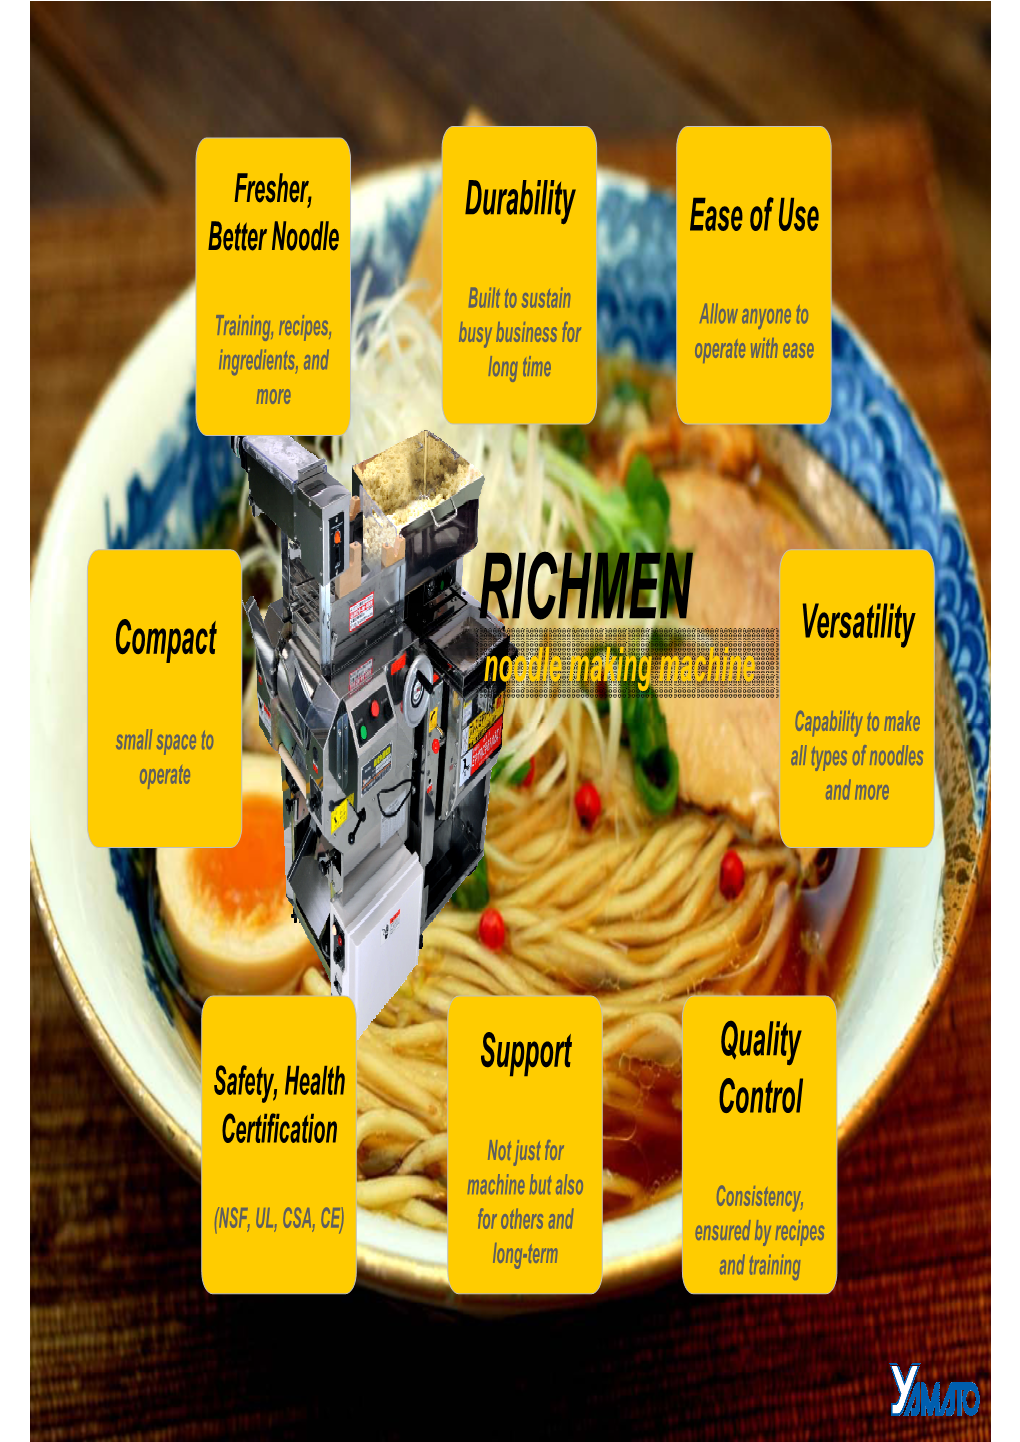 RICHMEN Compact Versatility Noodle Making Machine Capability to Make Small Space to All Types of Noodles Operate and More